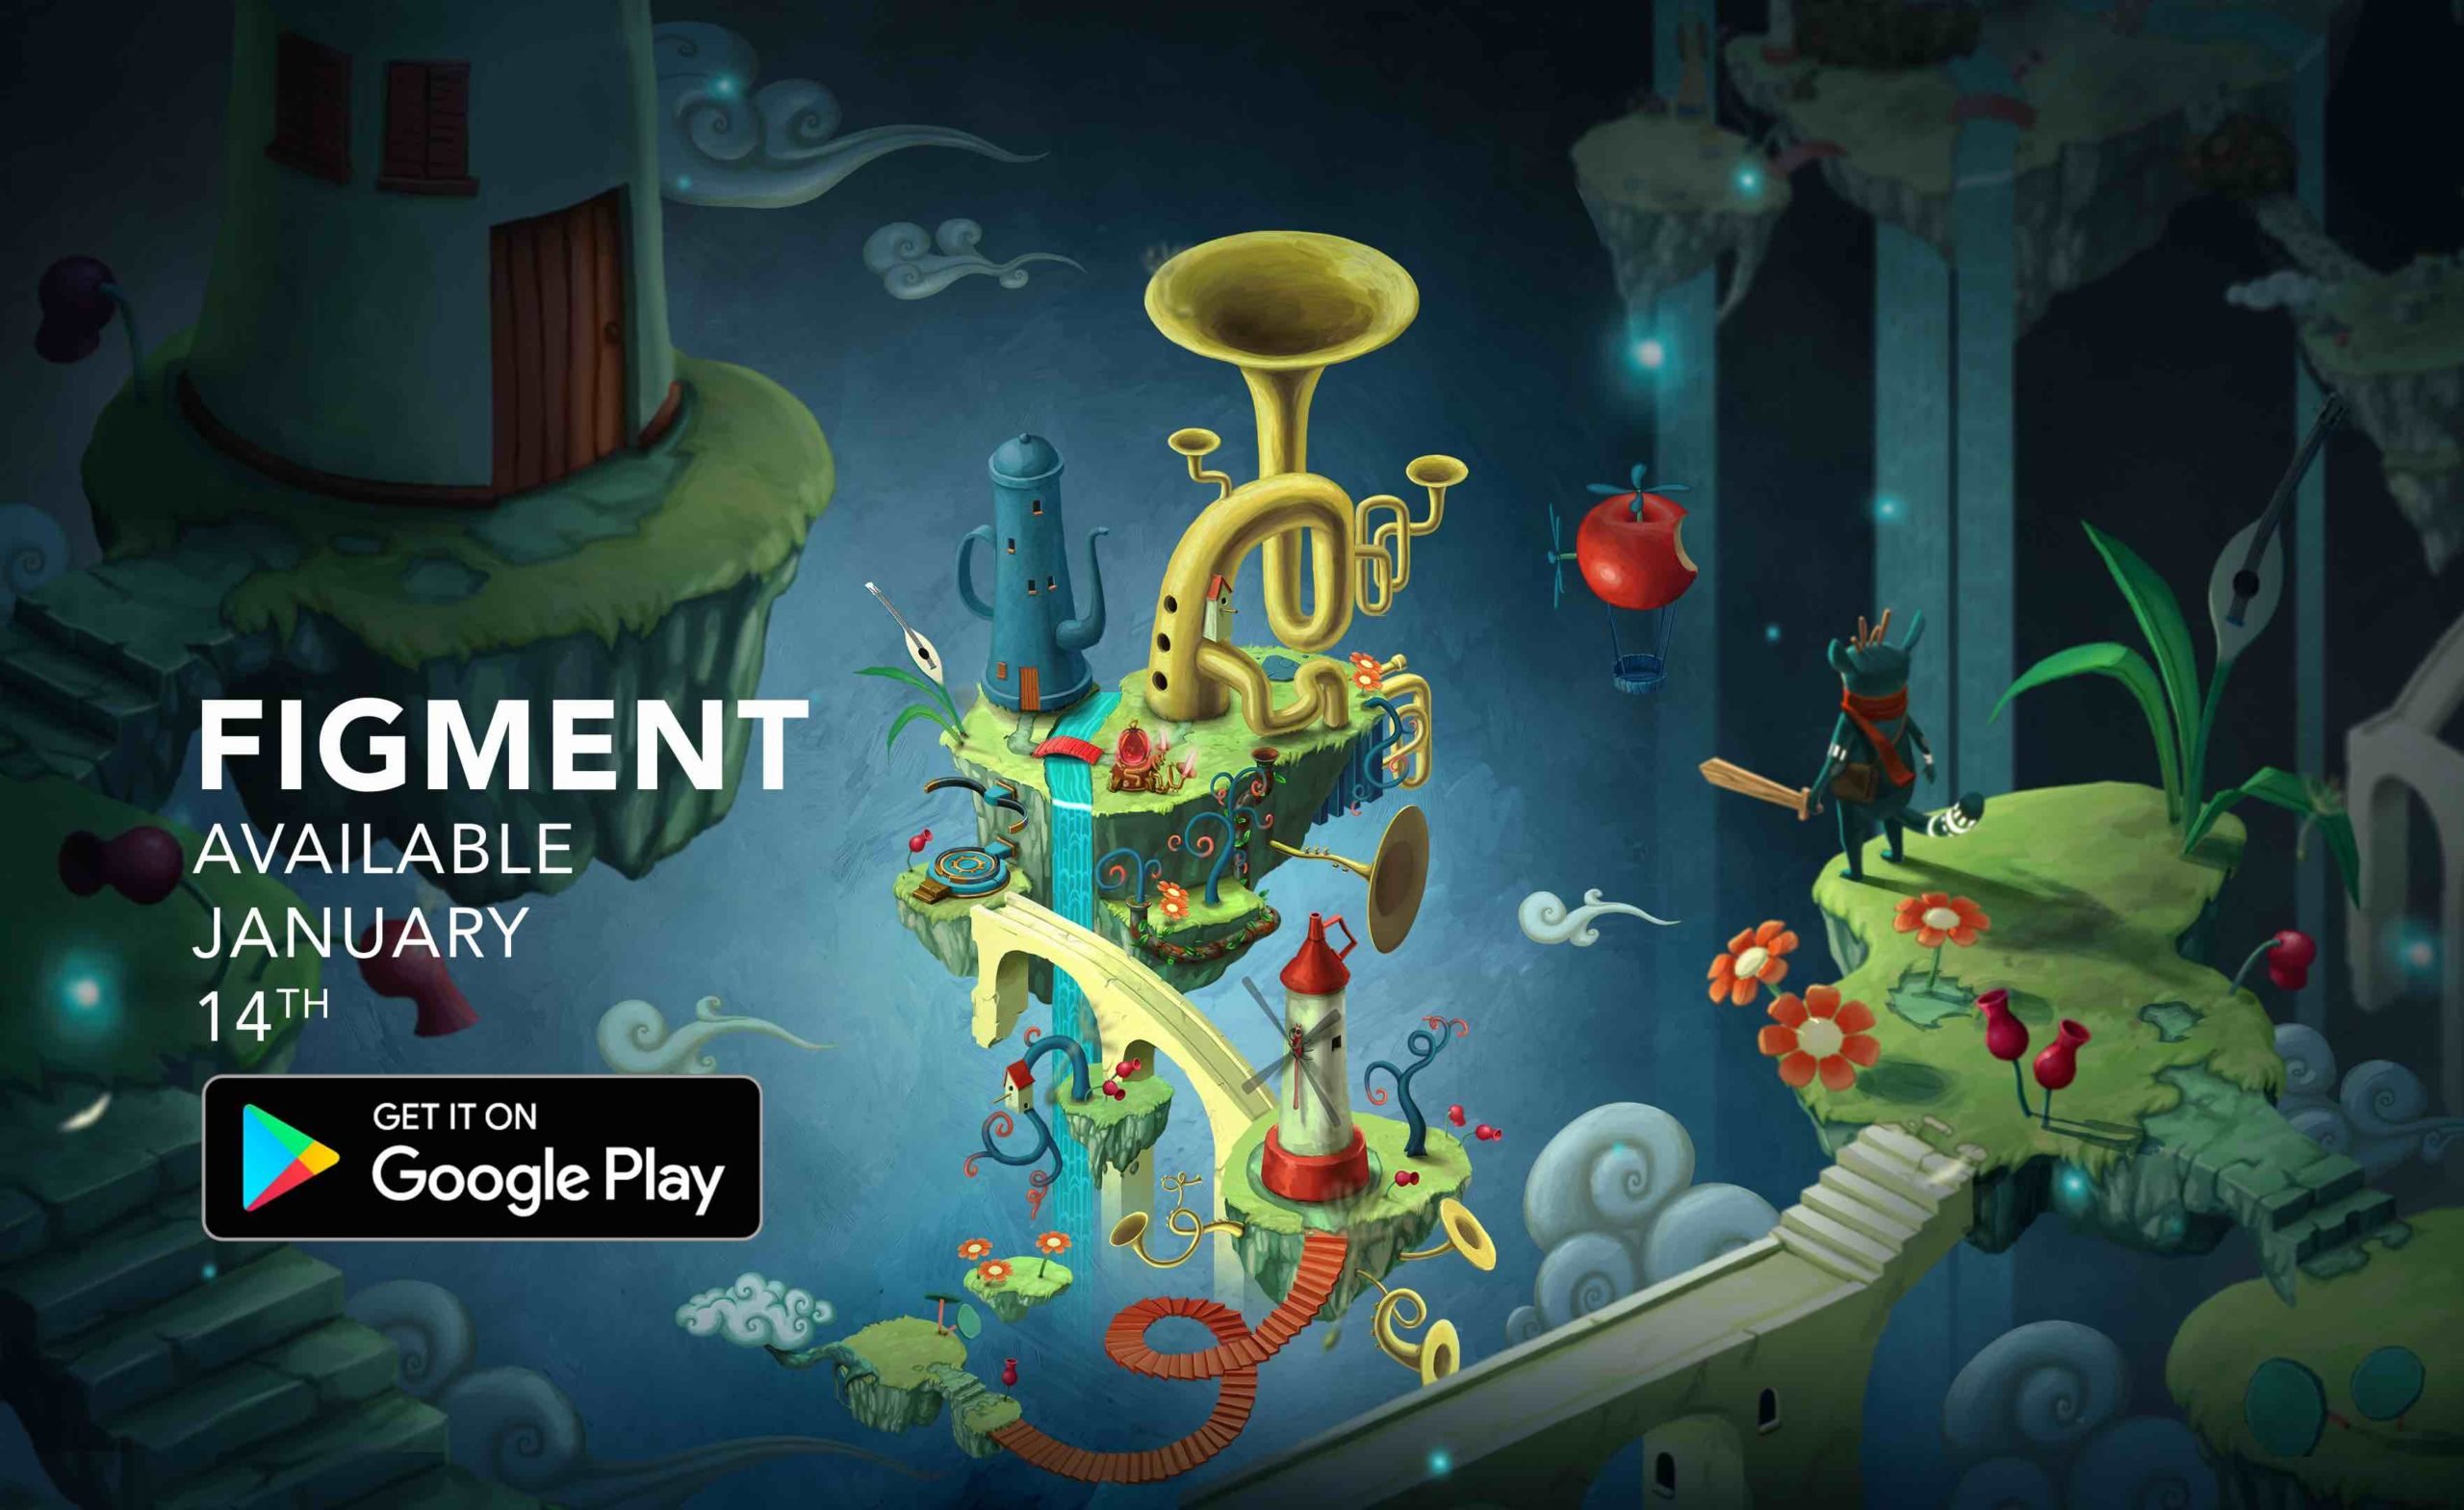 Puzzle Platformer Figment Arriving on Android This Month